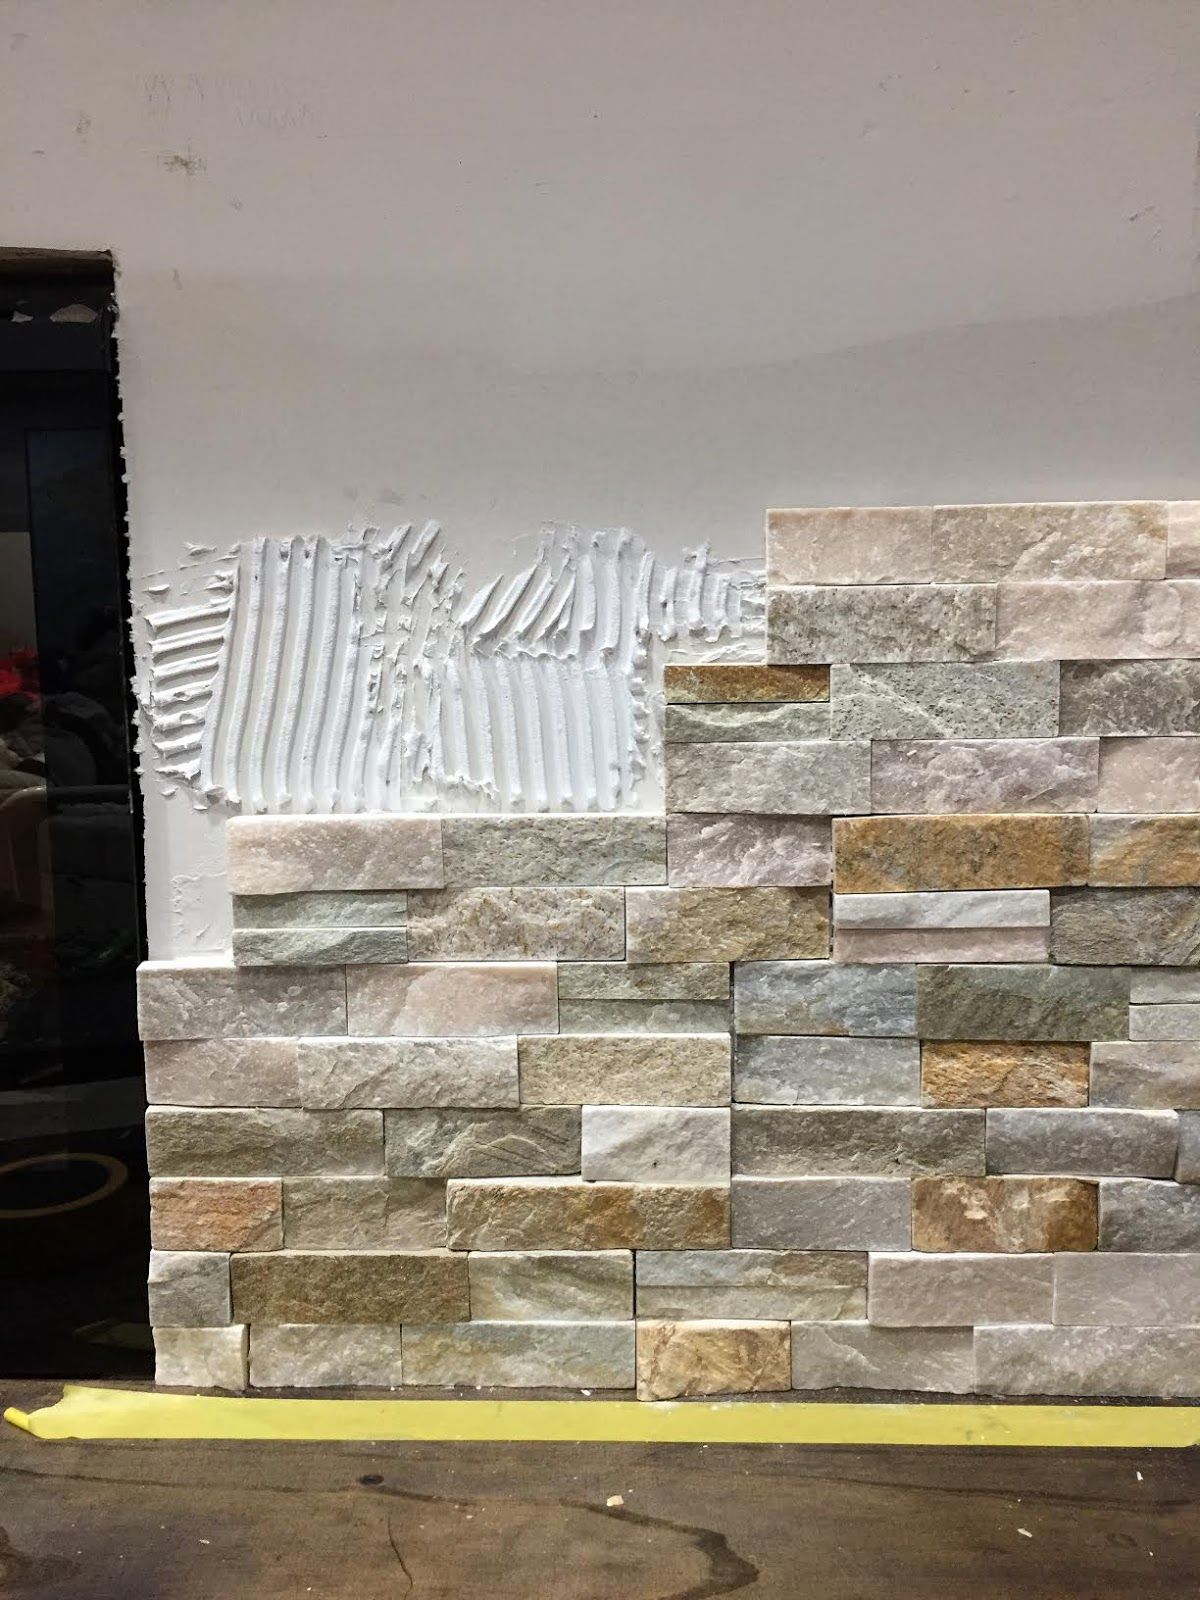 How to Install A Mantel On A Stone Fireplace Inspirational How to Install Stacked Stone Tile On A Fireplace Wall